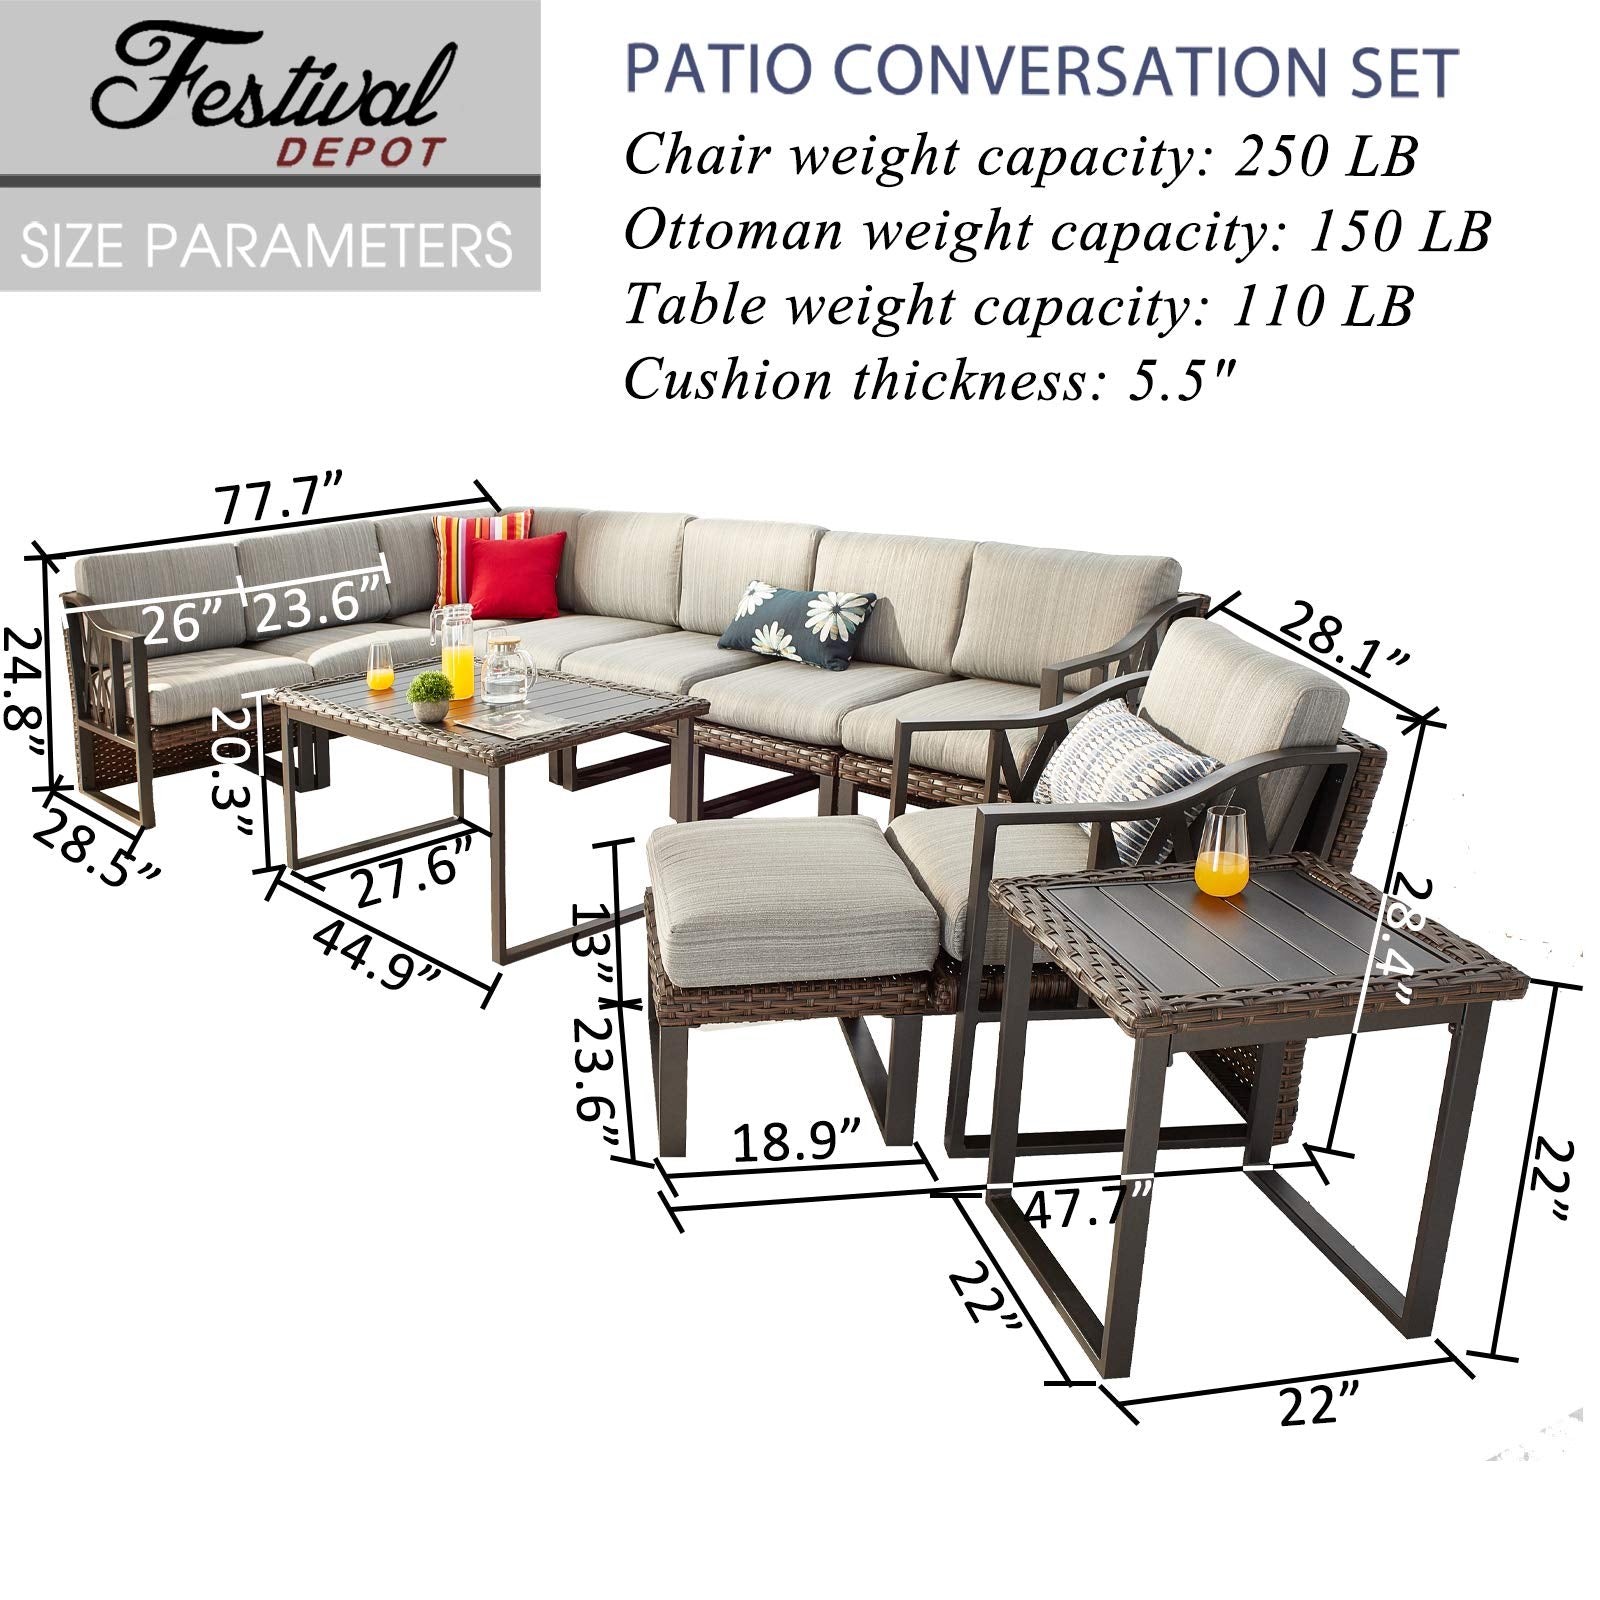 Festival Depot 11Pc Outdoor Furniture Patio Conversation Set Sectional Corner Sofa Chairs All Weather Wicker Ottoman Metal Frame Slatted Coffee Table with Thick Grey Seat Back Cushions Without Pillows